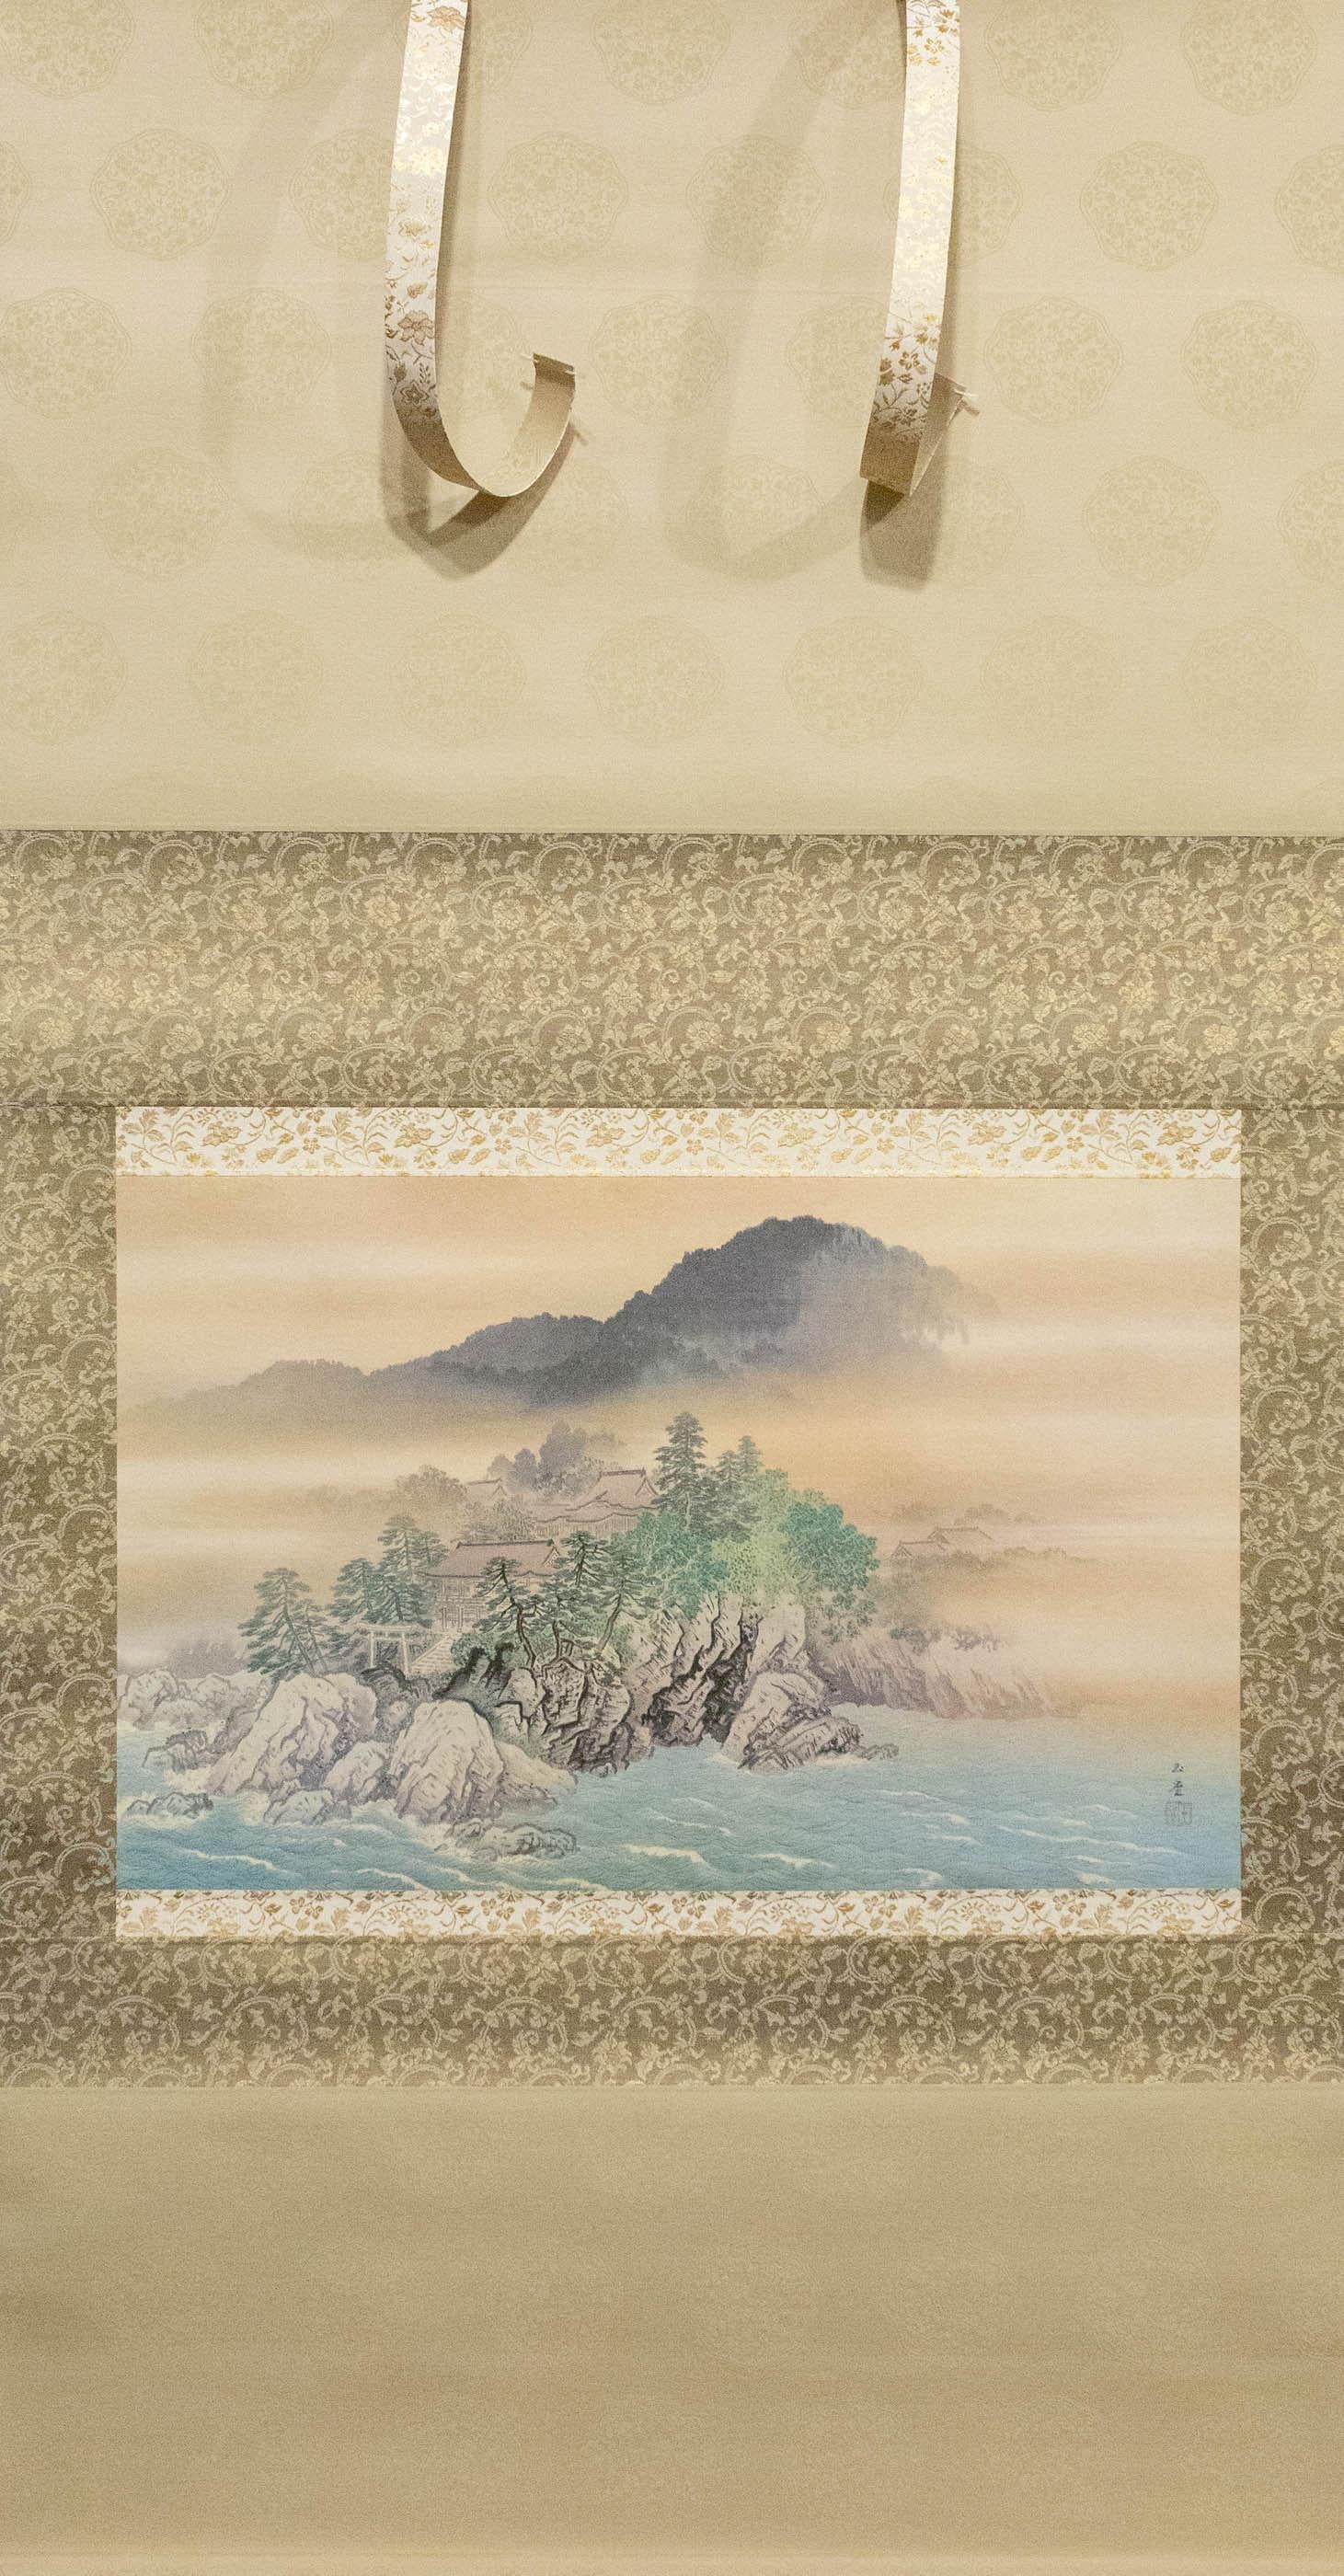 Chikubu is an island in Lake Biwa, Shiga prefecture. This painting depicts a tori gate leading to a temple, and in the background is Kyoto and the Higashiyama Hills. Mineral pigments on silk mounted on silk border. Beautifully mounted, good